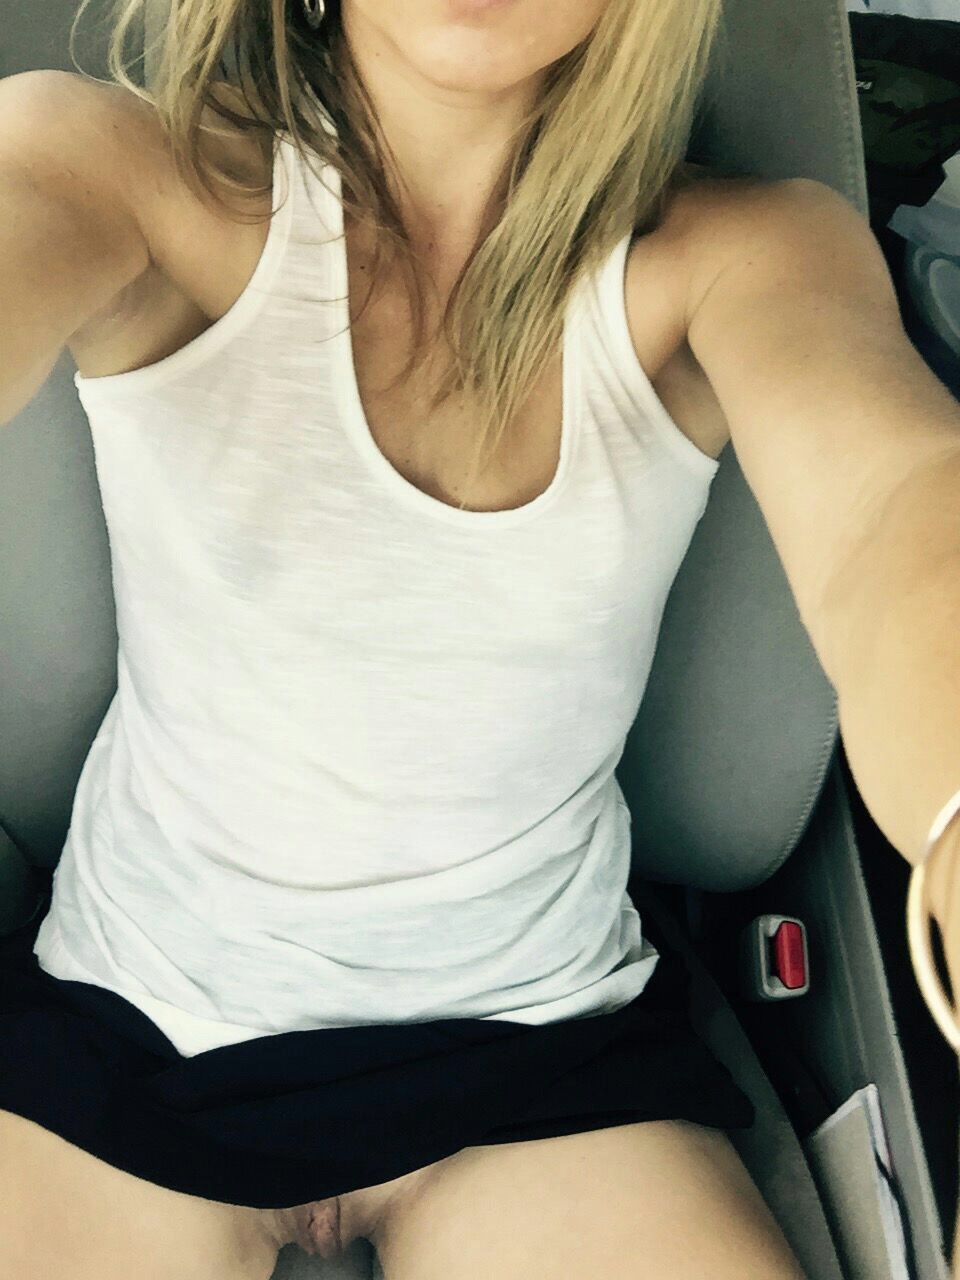 lildebbiesnack:  craving cock in the car